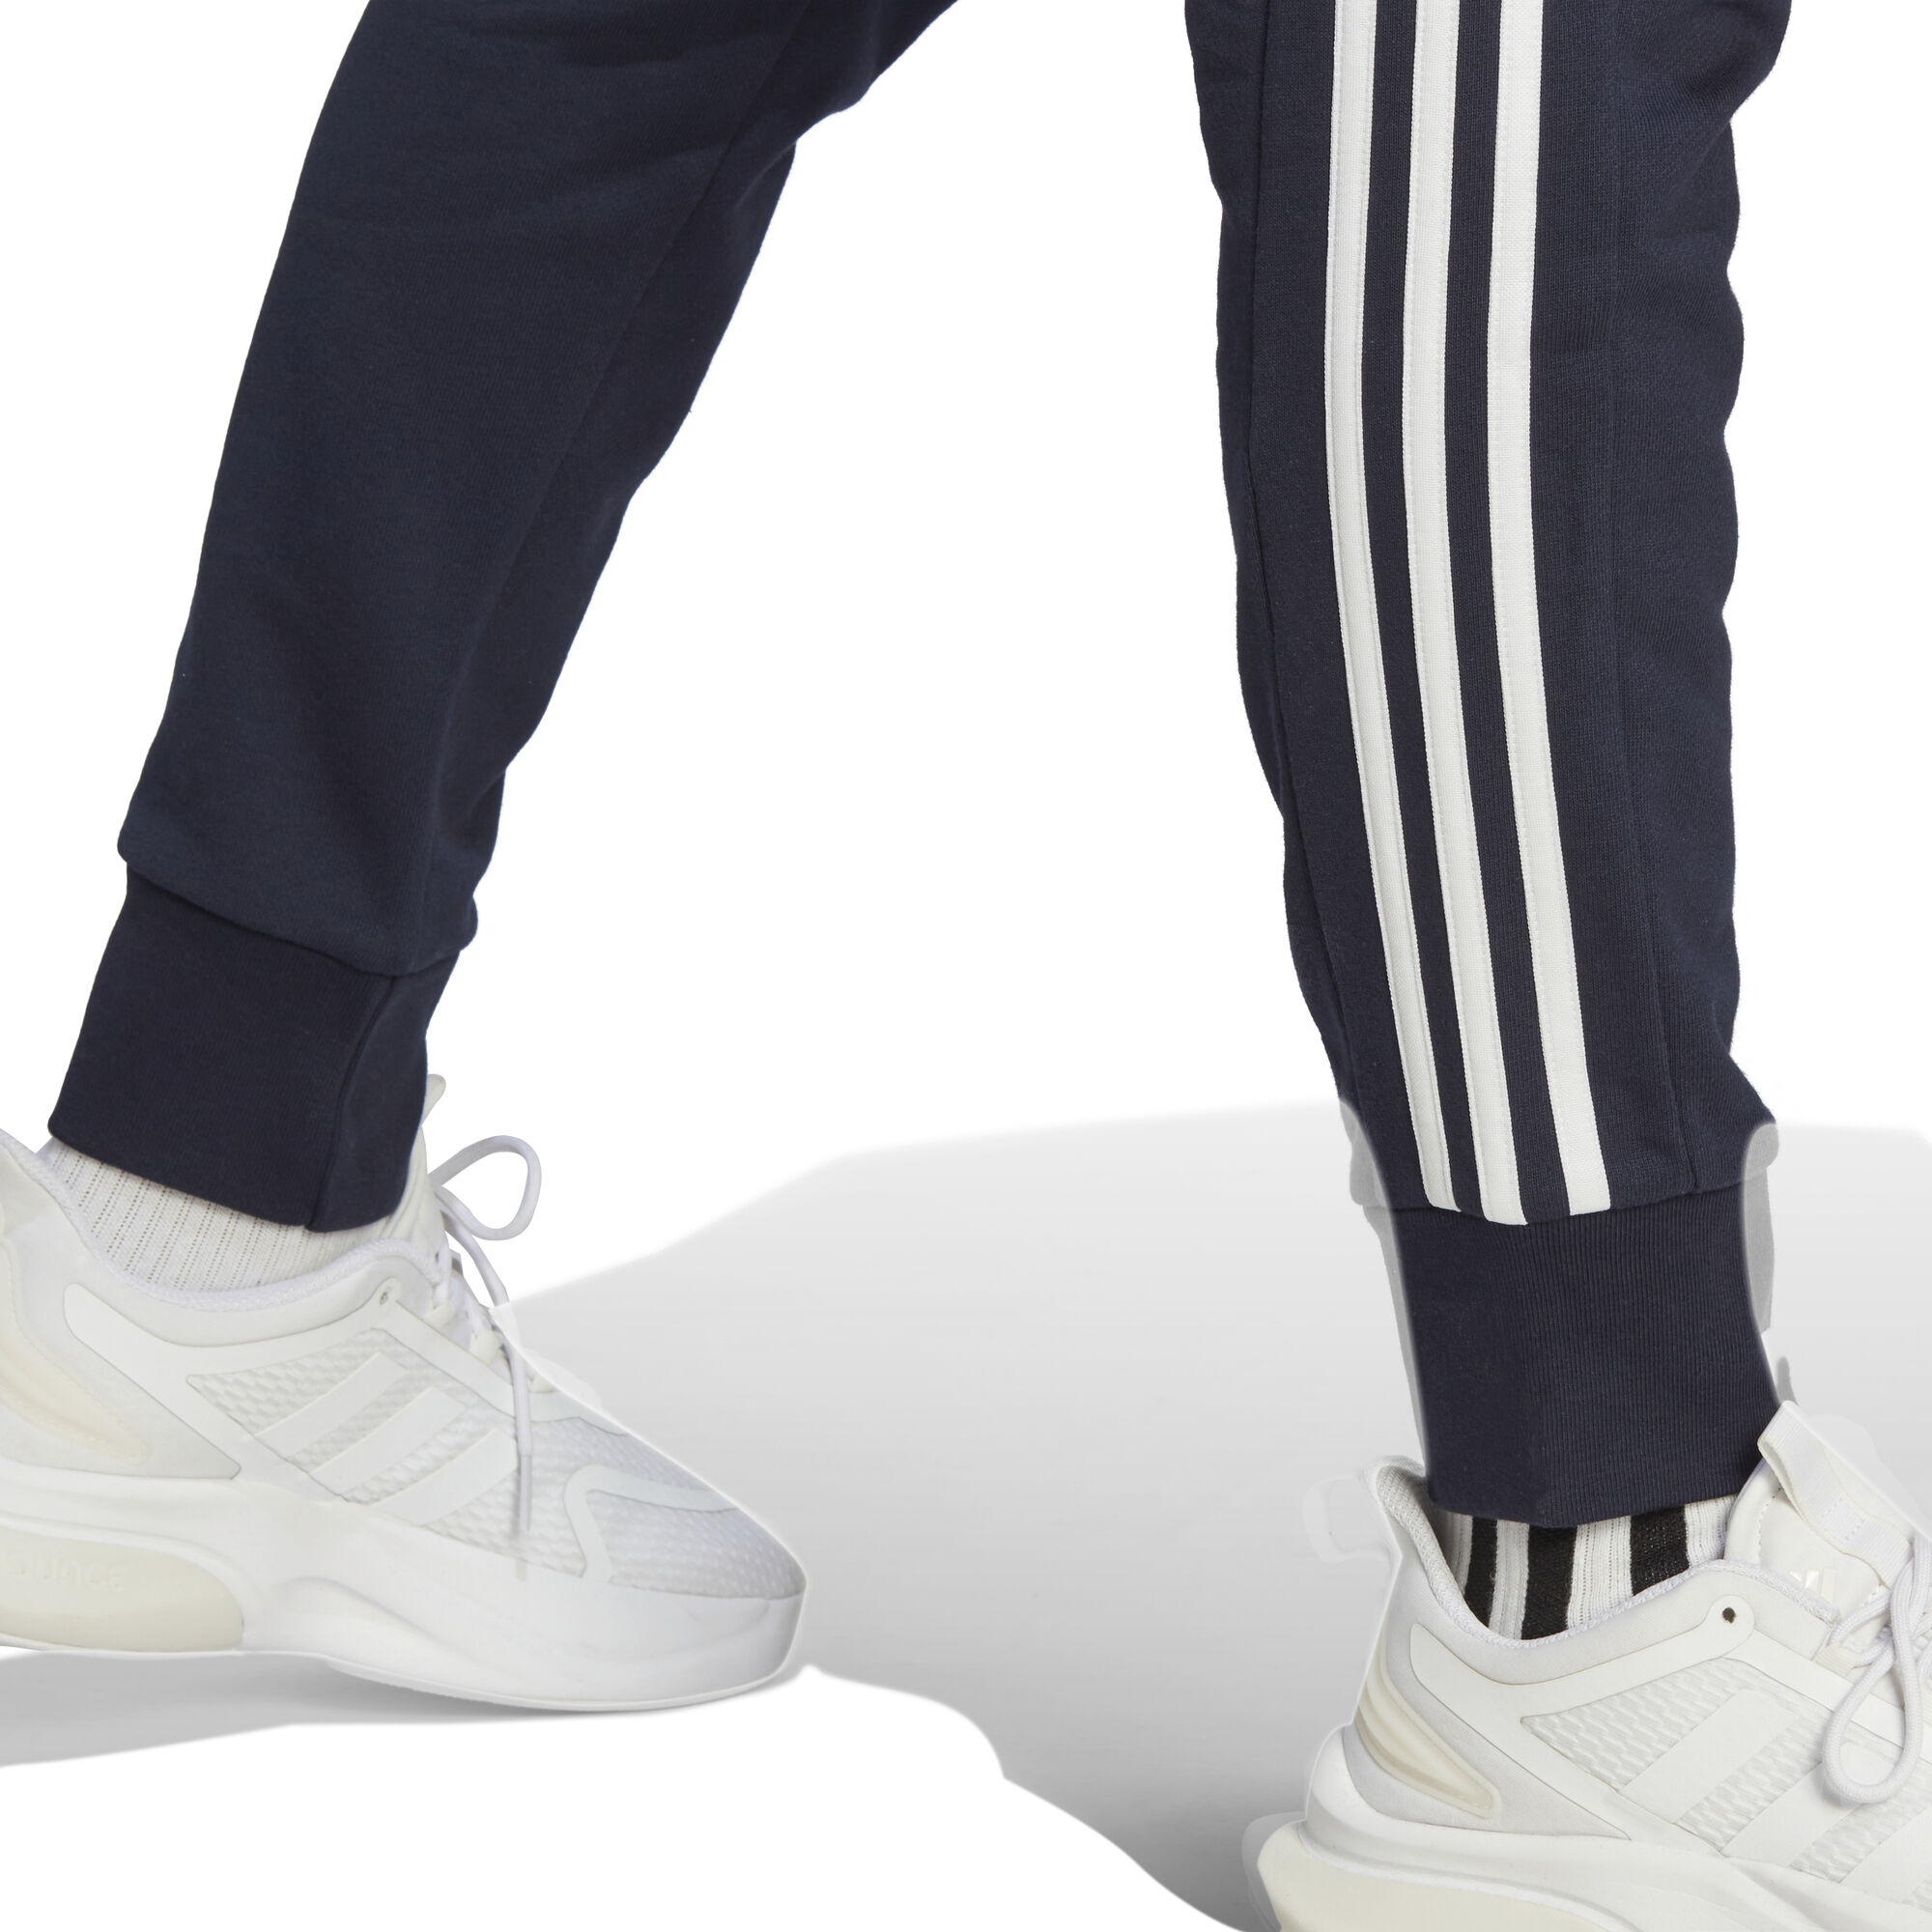  adidas Men's Essentials French Terry Tapered Cuff 3-Stripes  Pants, Black/White, Medium : Sports & Outdoors